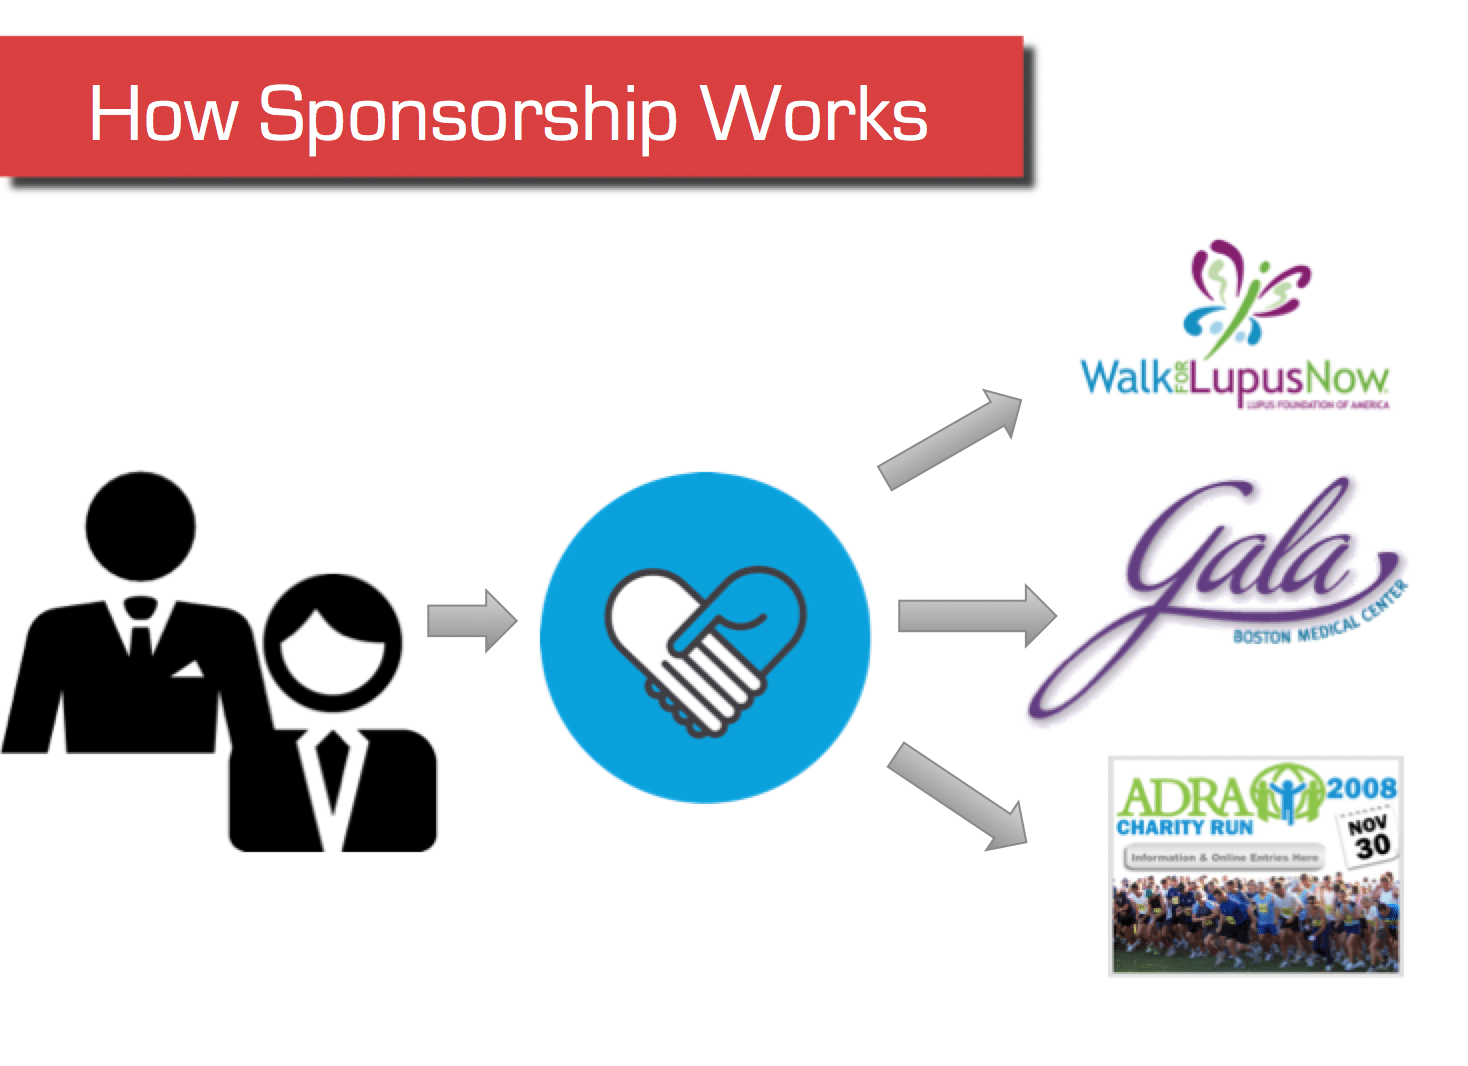 How to Turn Sponsorship into Cause Marketing and Raise